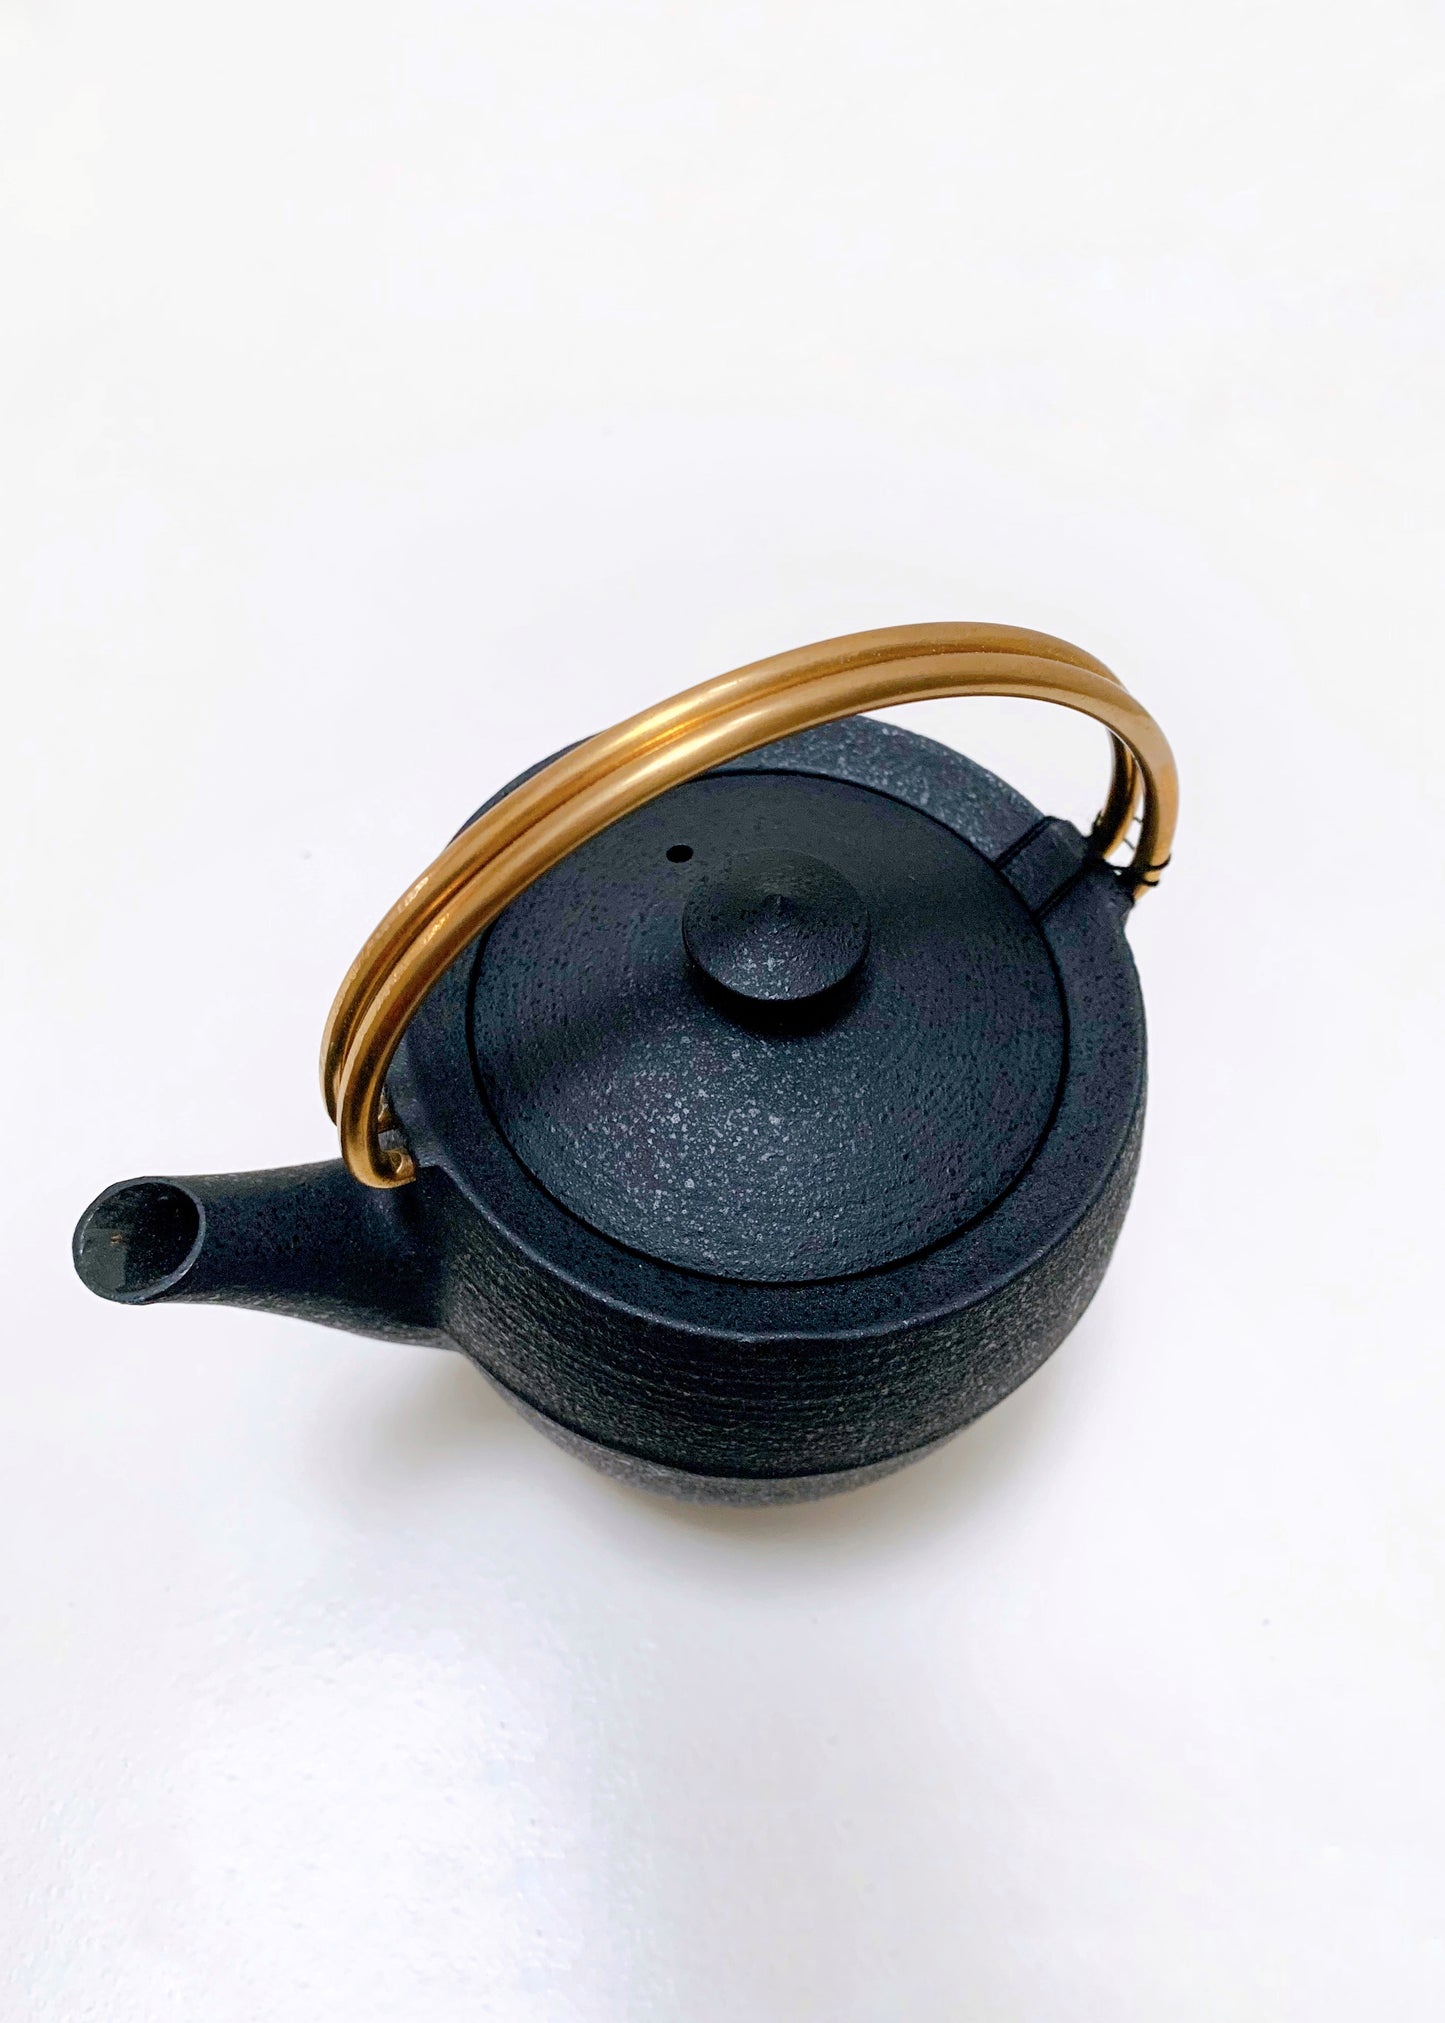 Cast Iron Teapot with Brass Handle